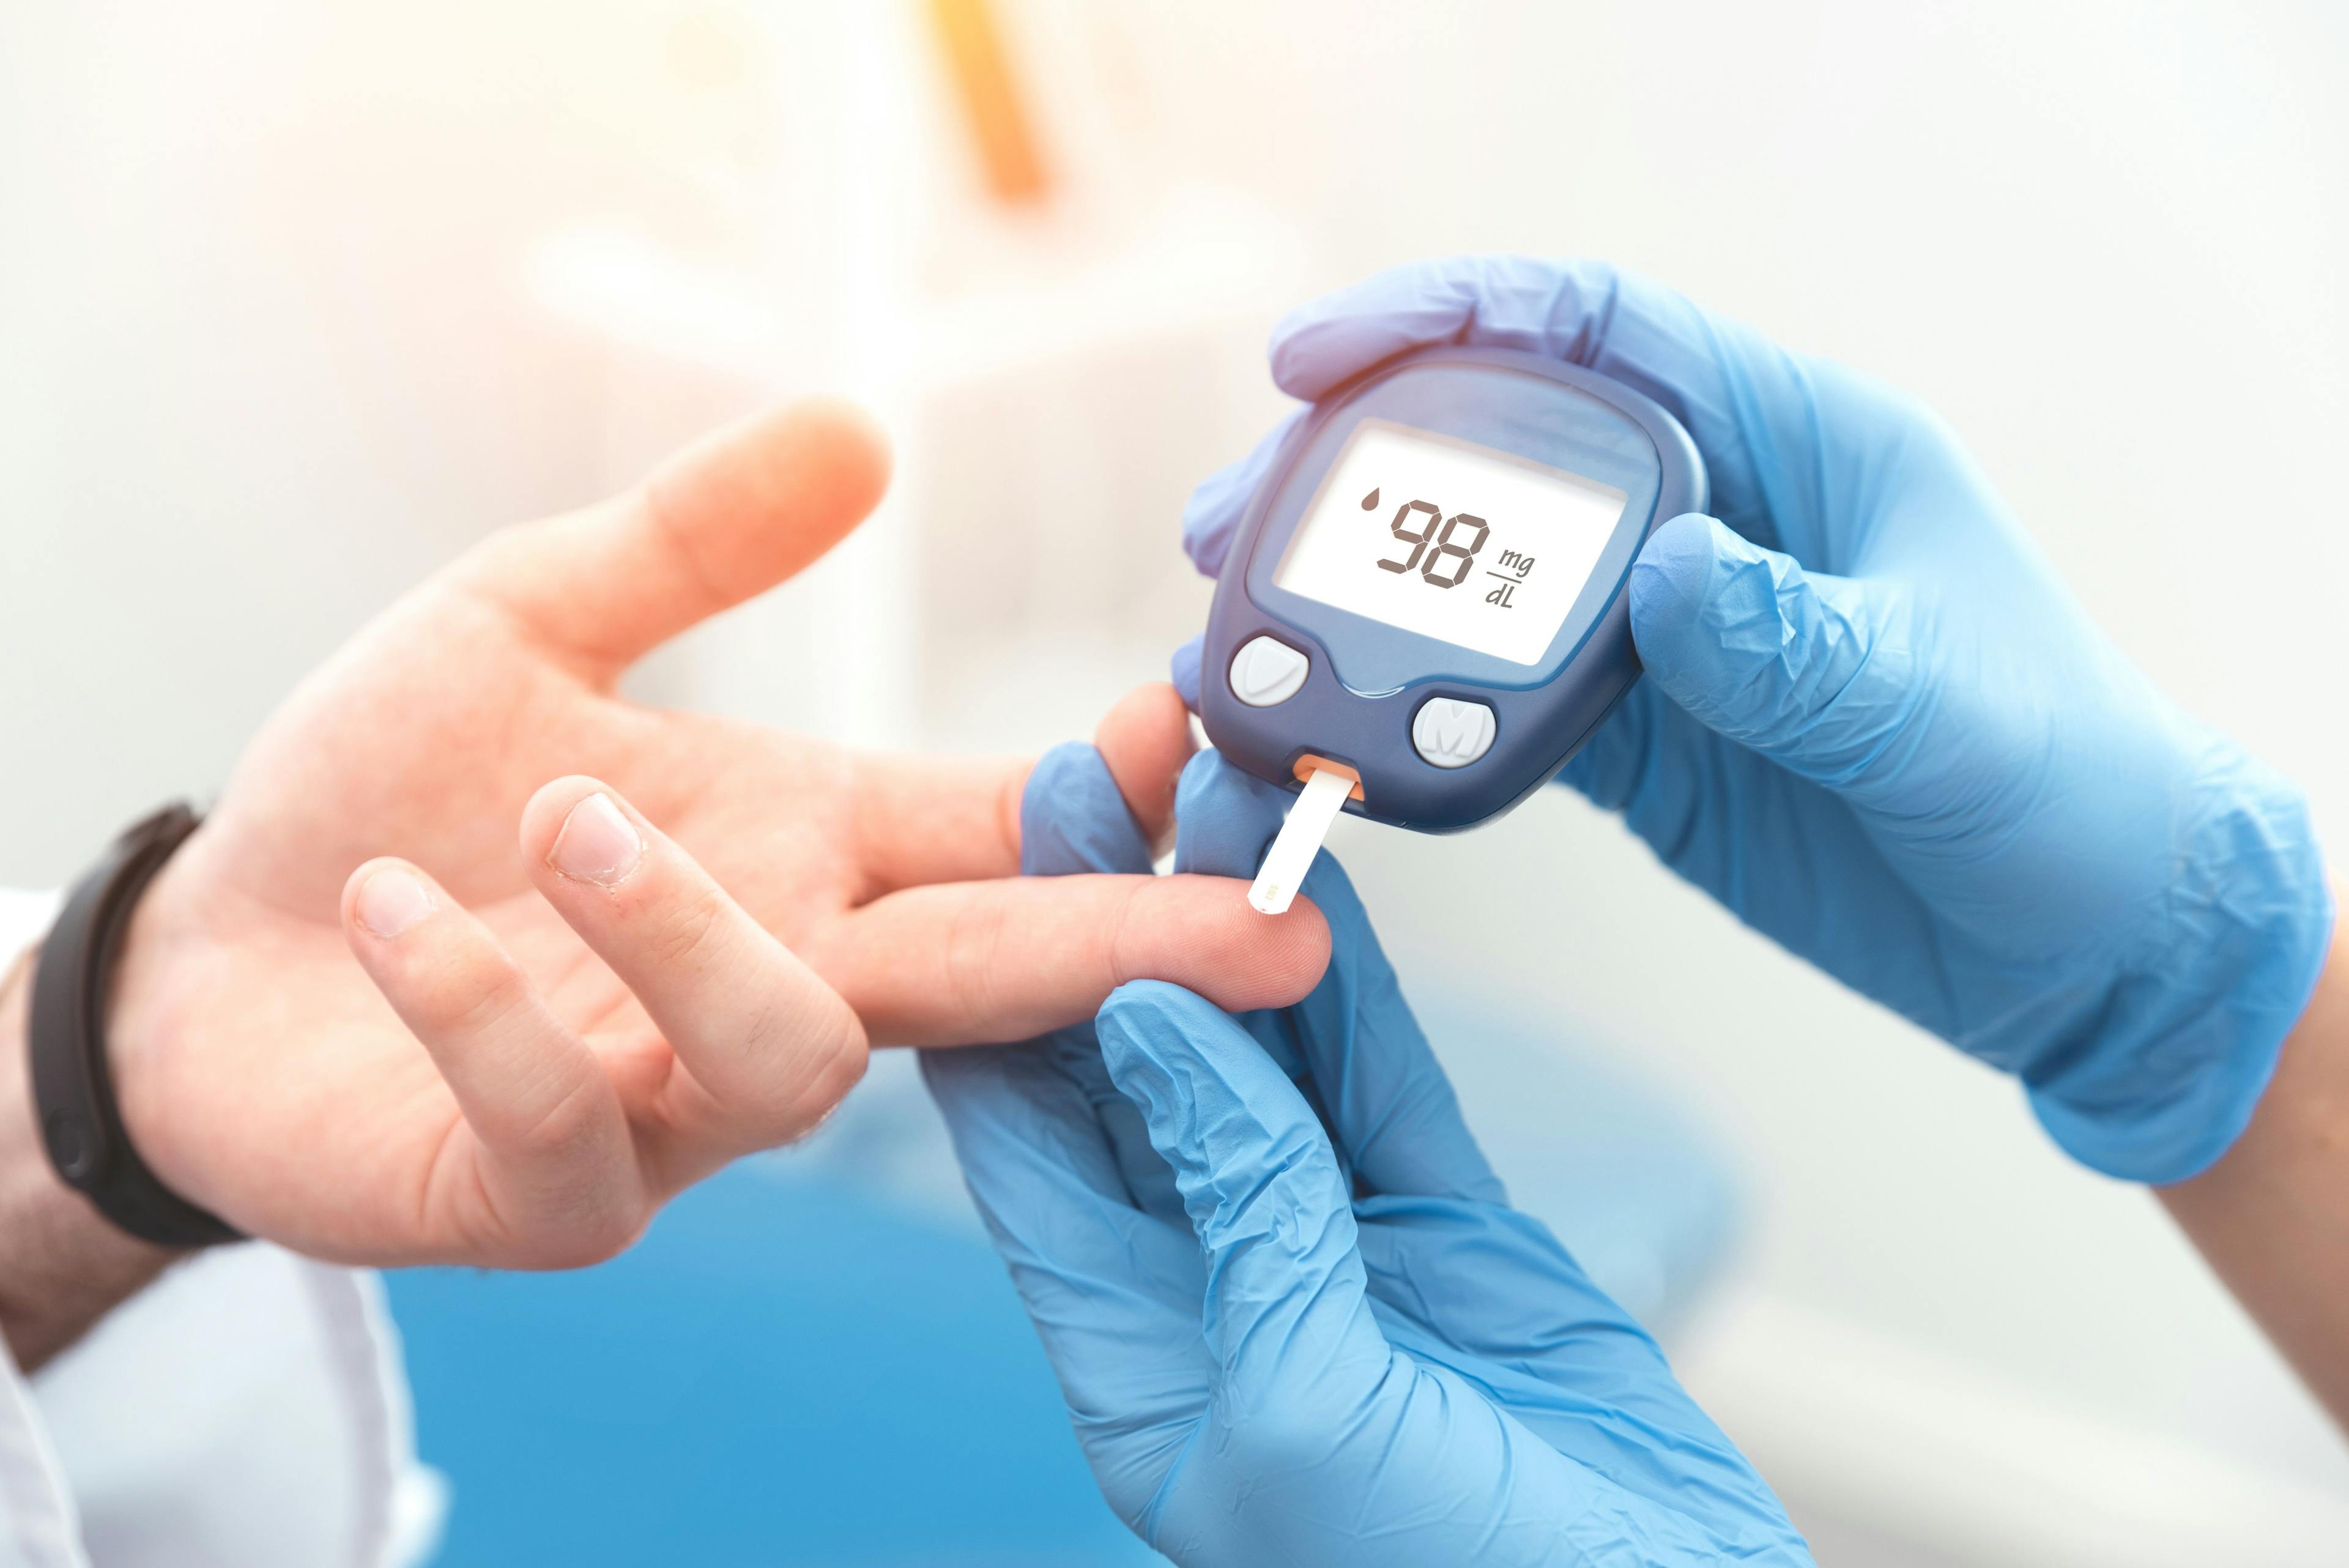 Diabetes contributes to early menopause